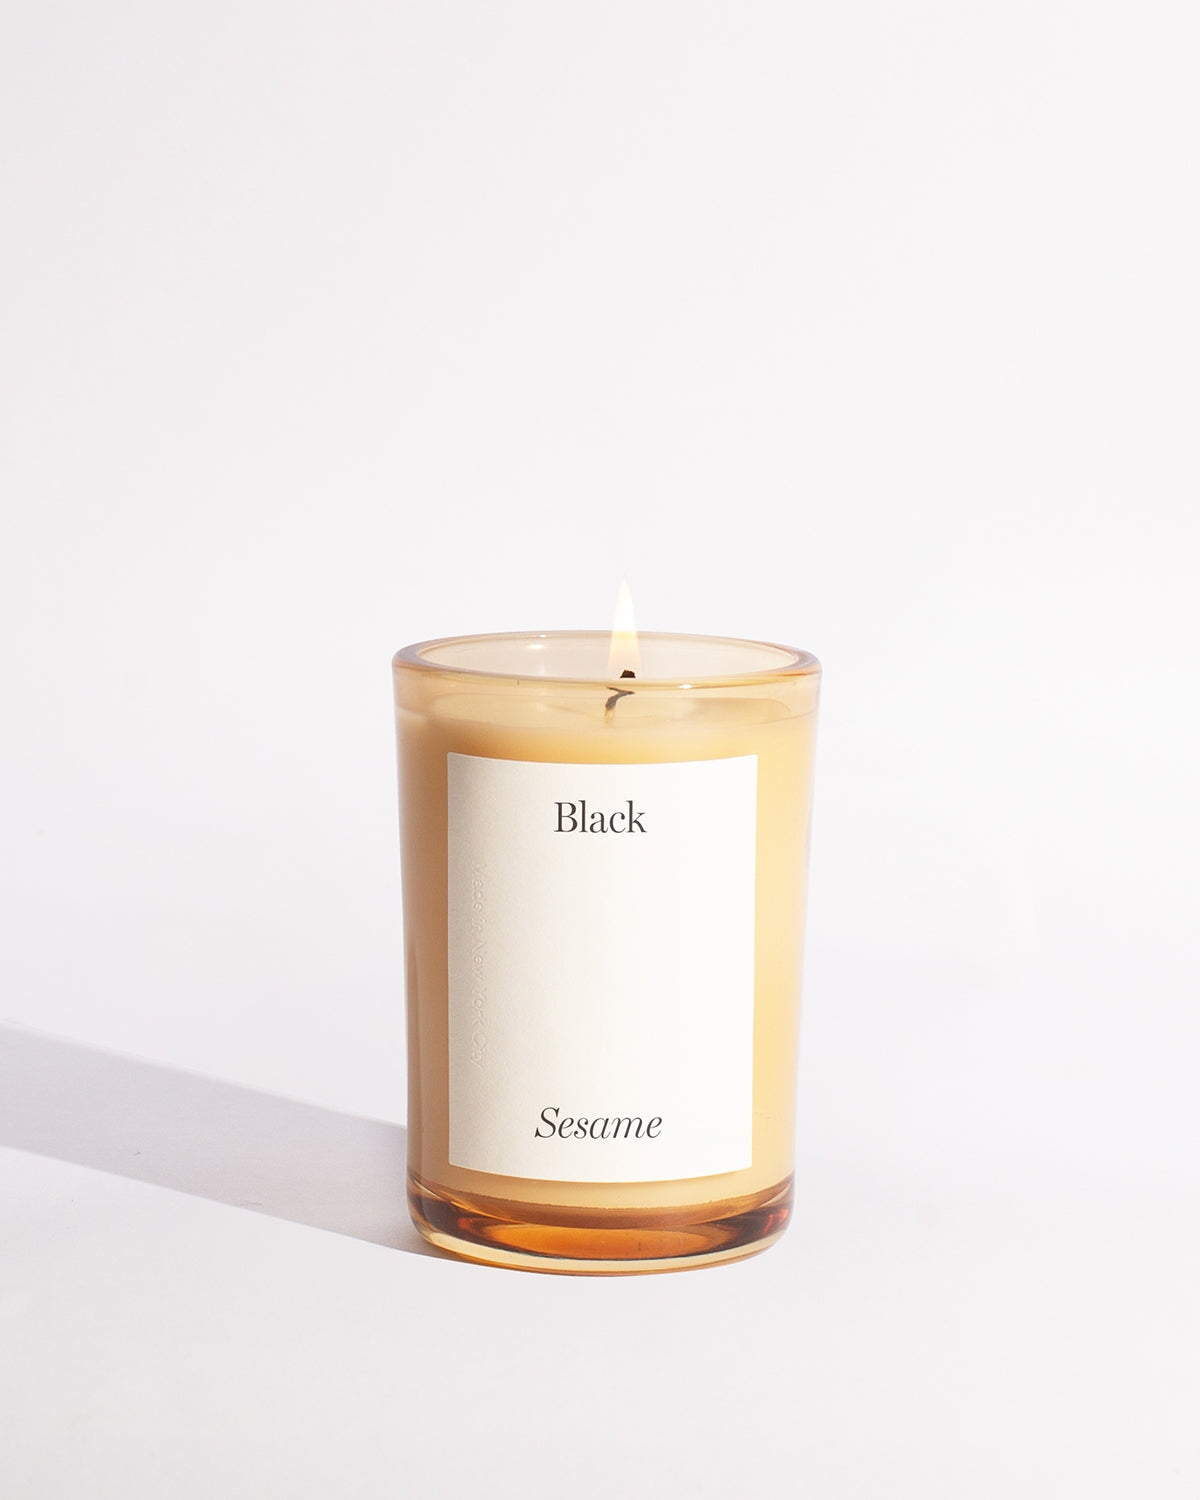 Limited Edition Black Sesame Candle Limited Edition Brooklyn Candle Studio 